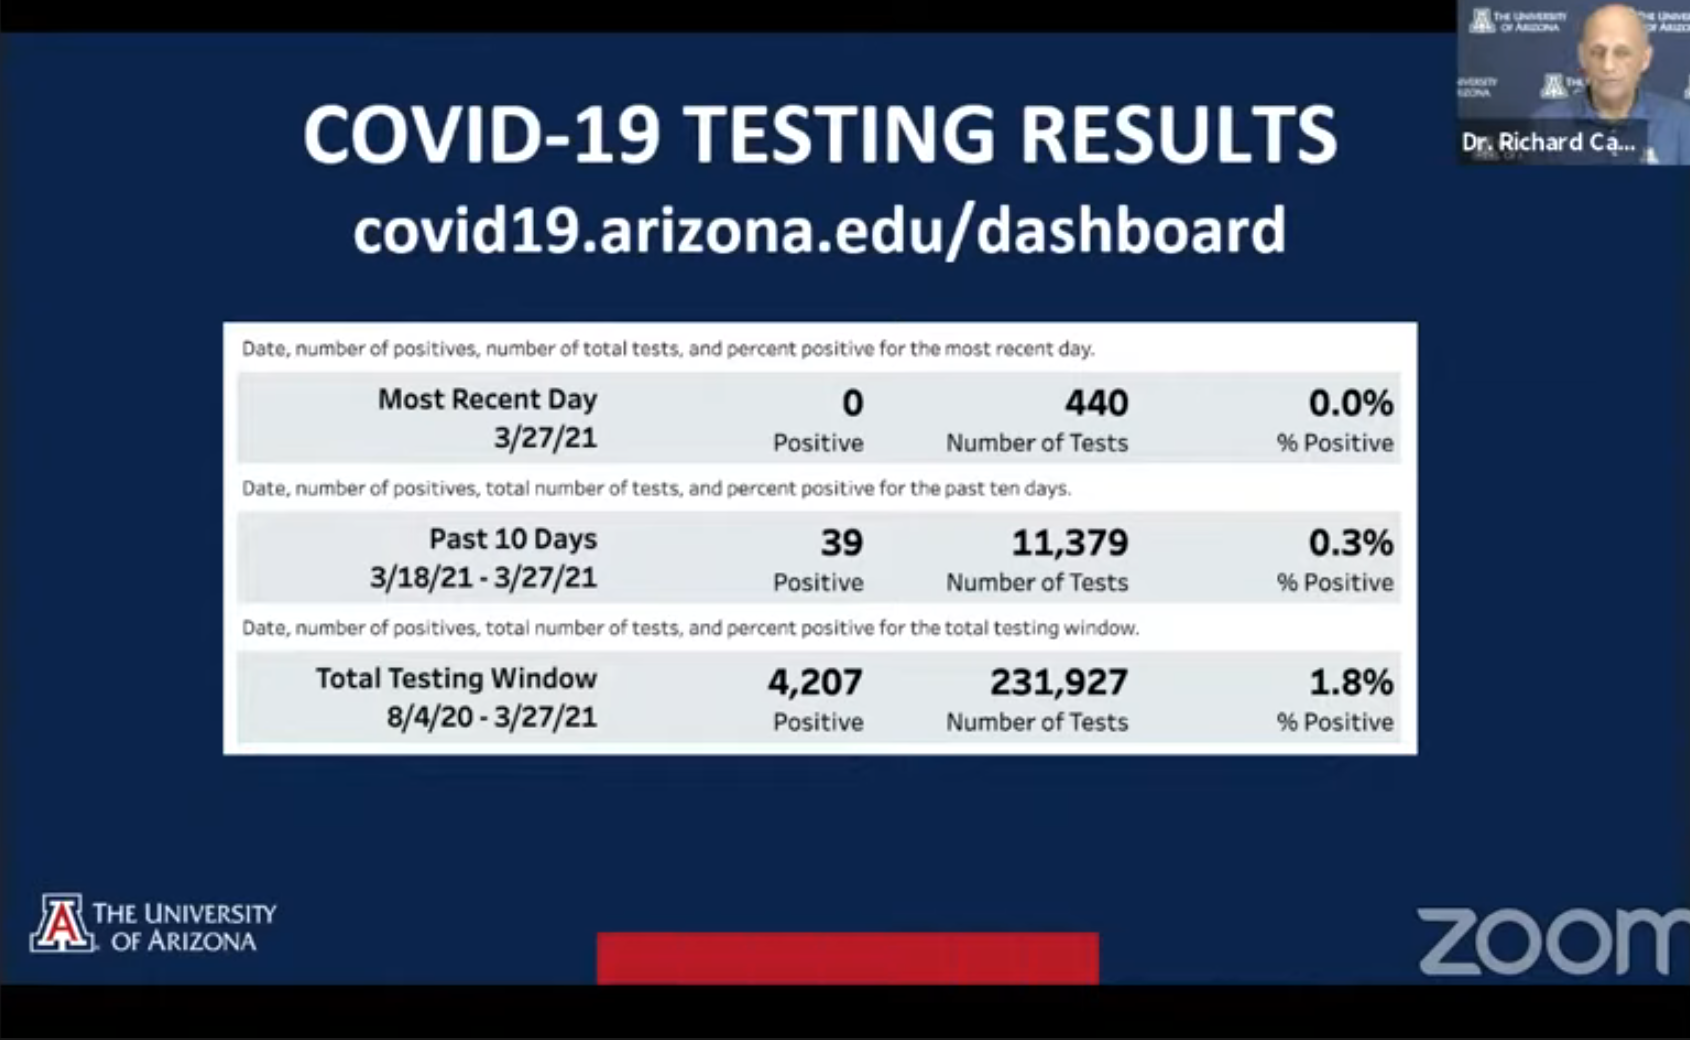 Screenshot of recent COVID-19 testing result data, which indicated a 0.3% positivity rate out of over 11,000 tests distributed in a 10-day period.